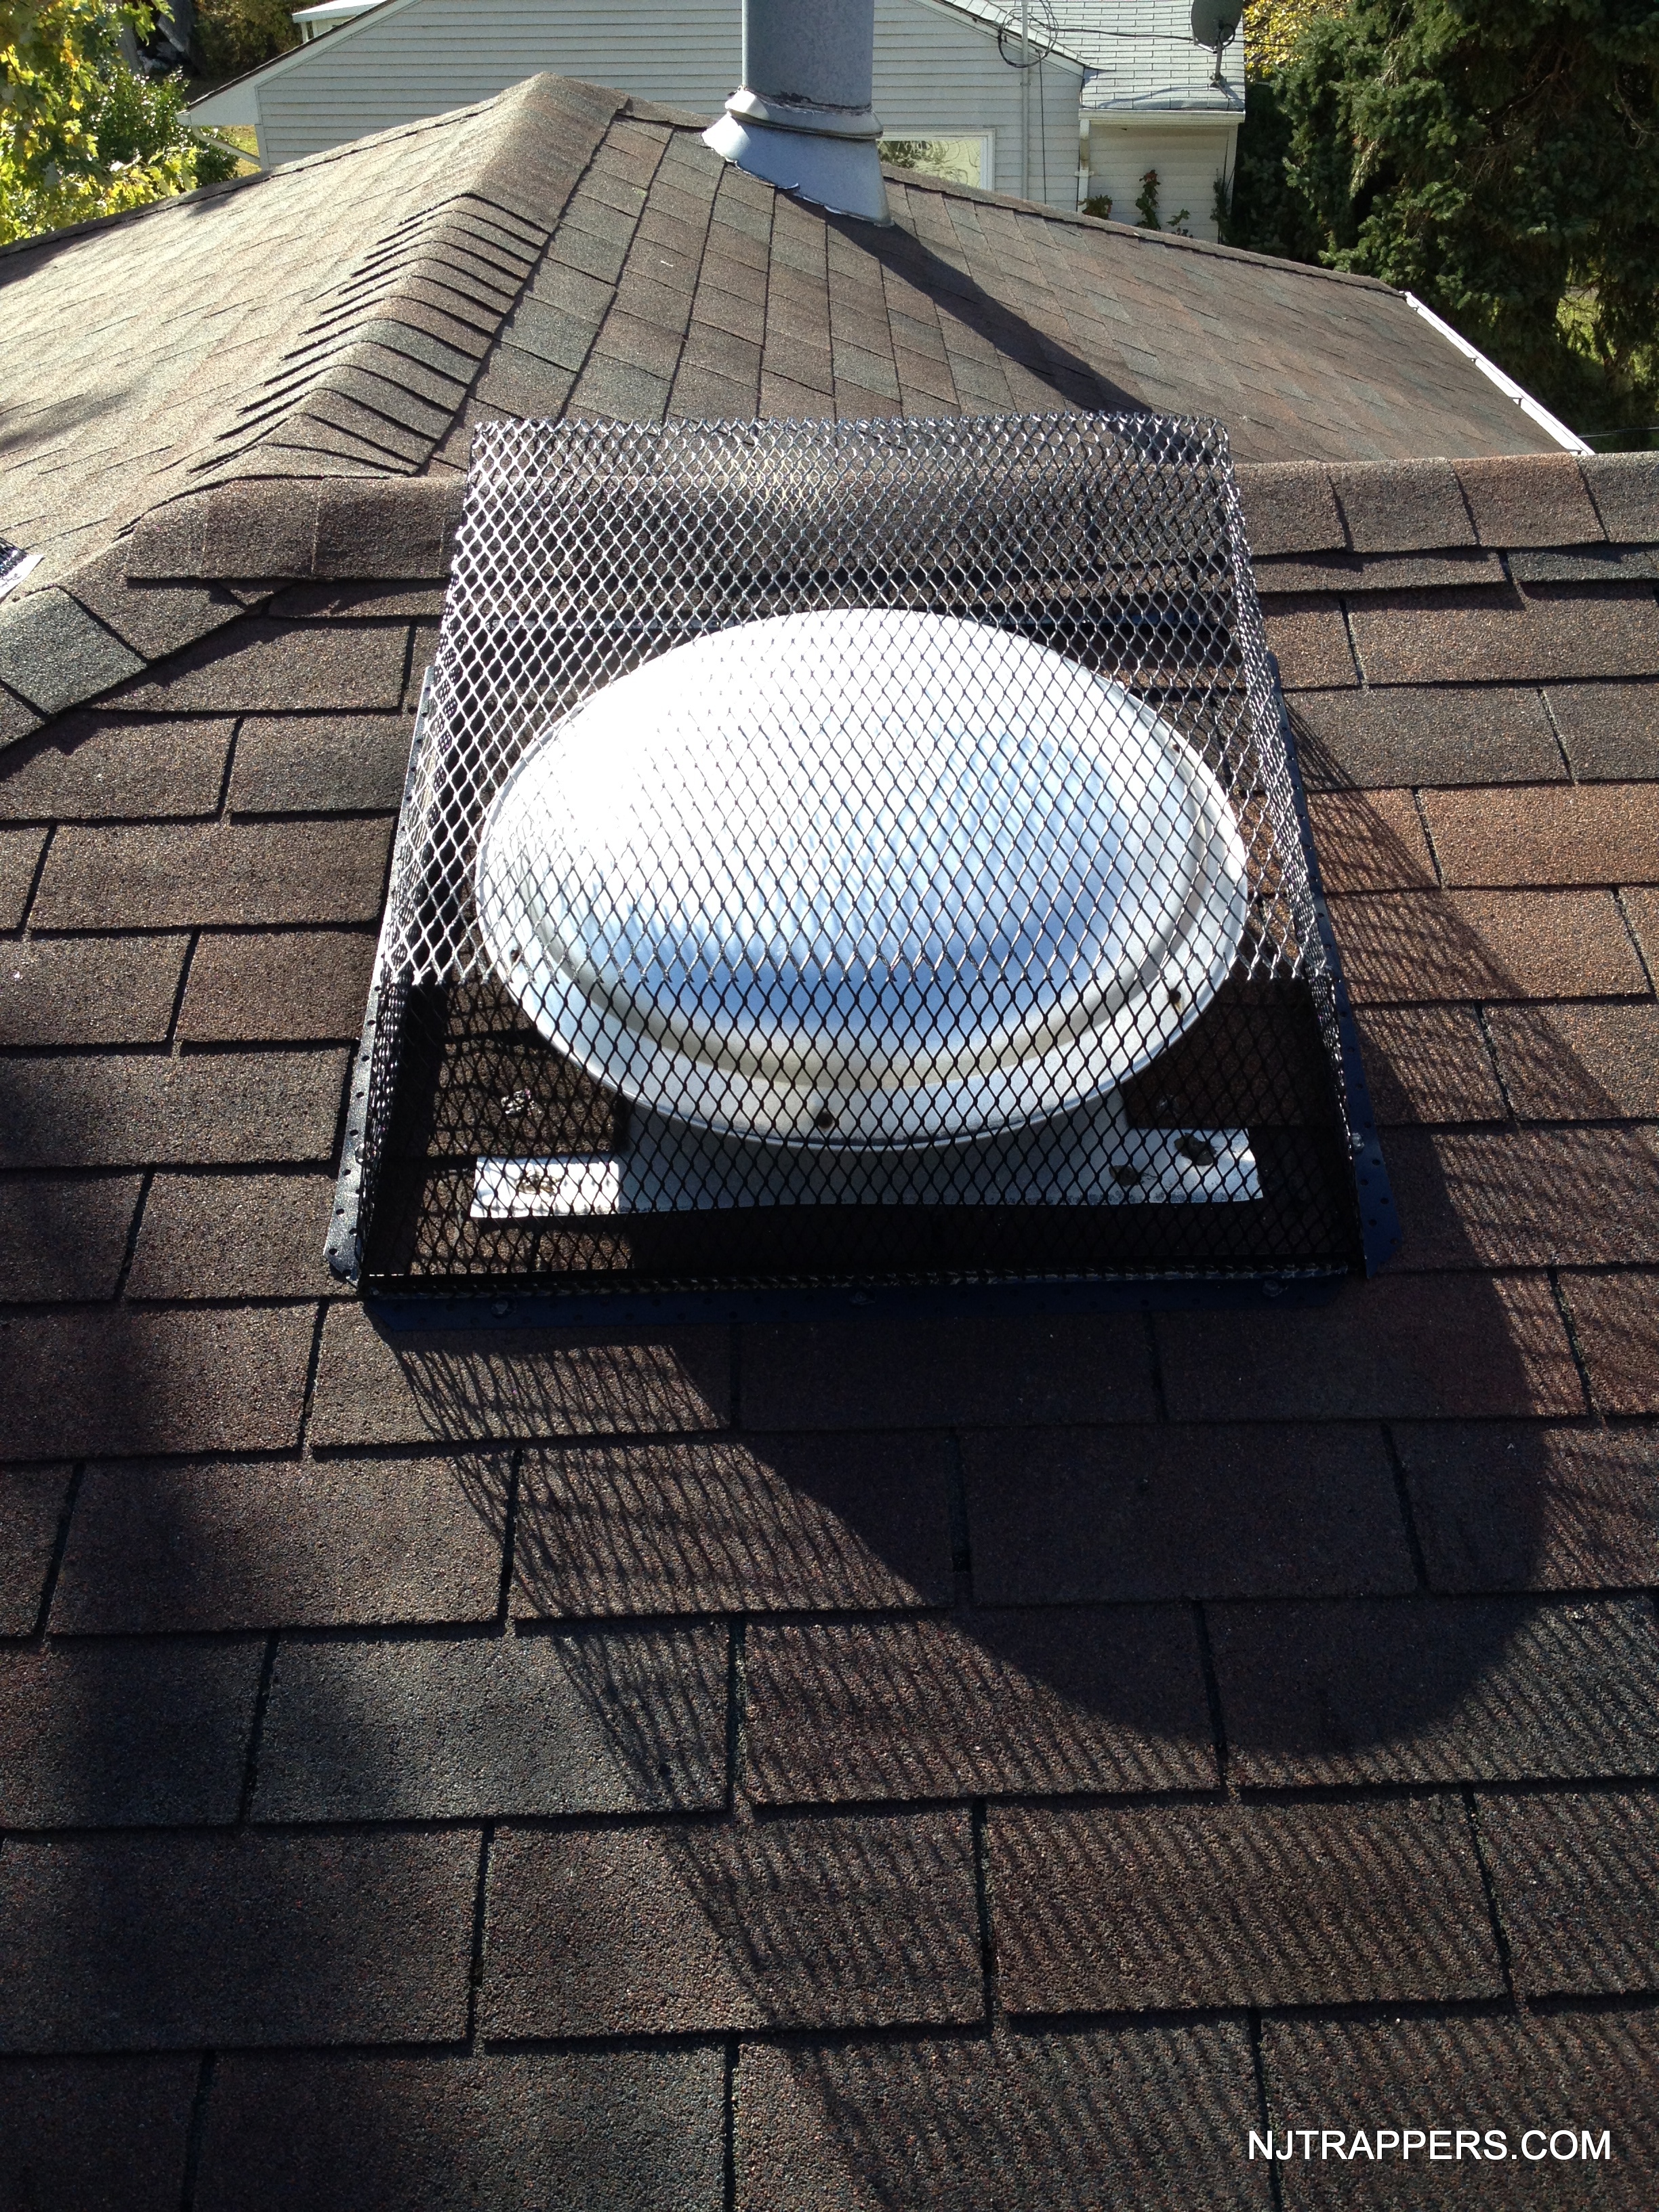 NJ Trappers » Attic Fan and Roof Vent Corners